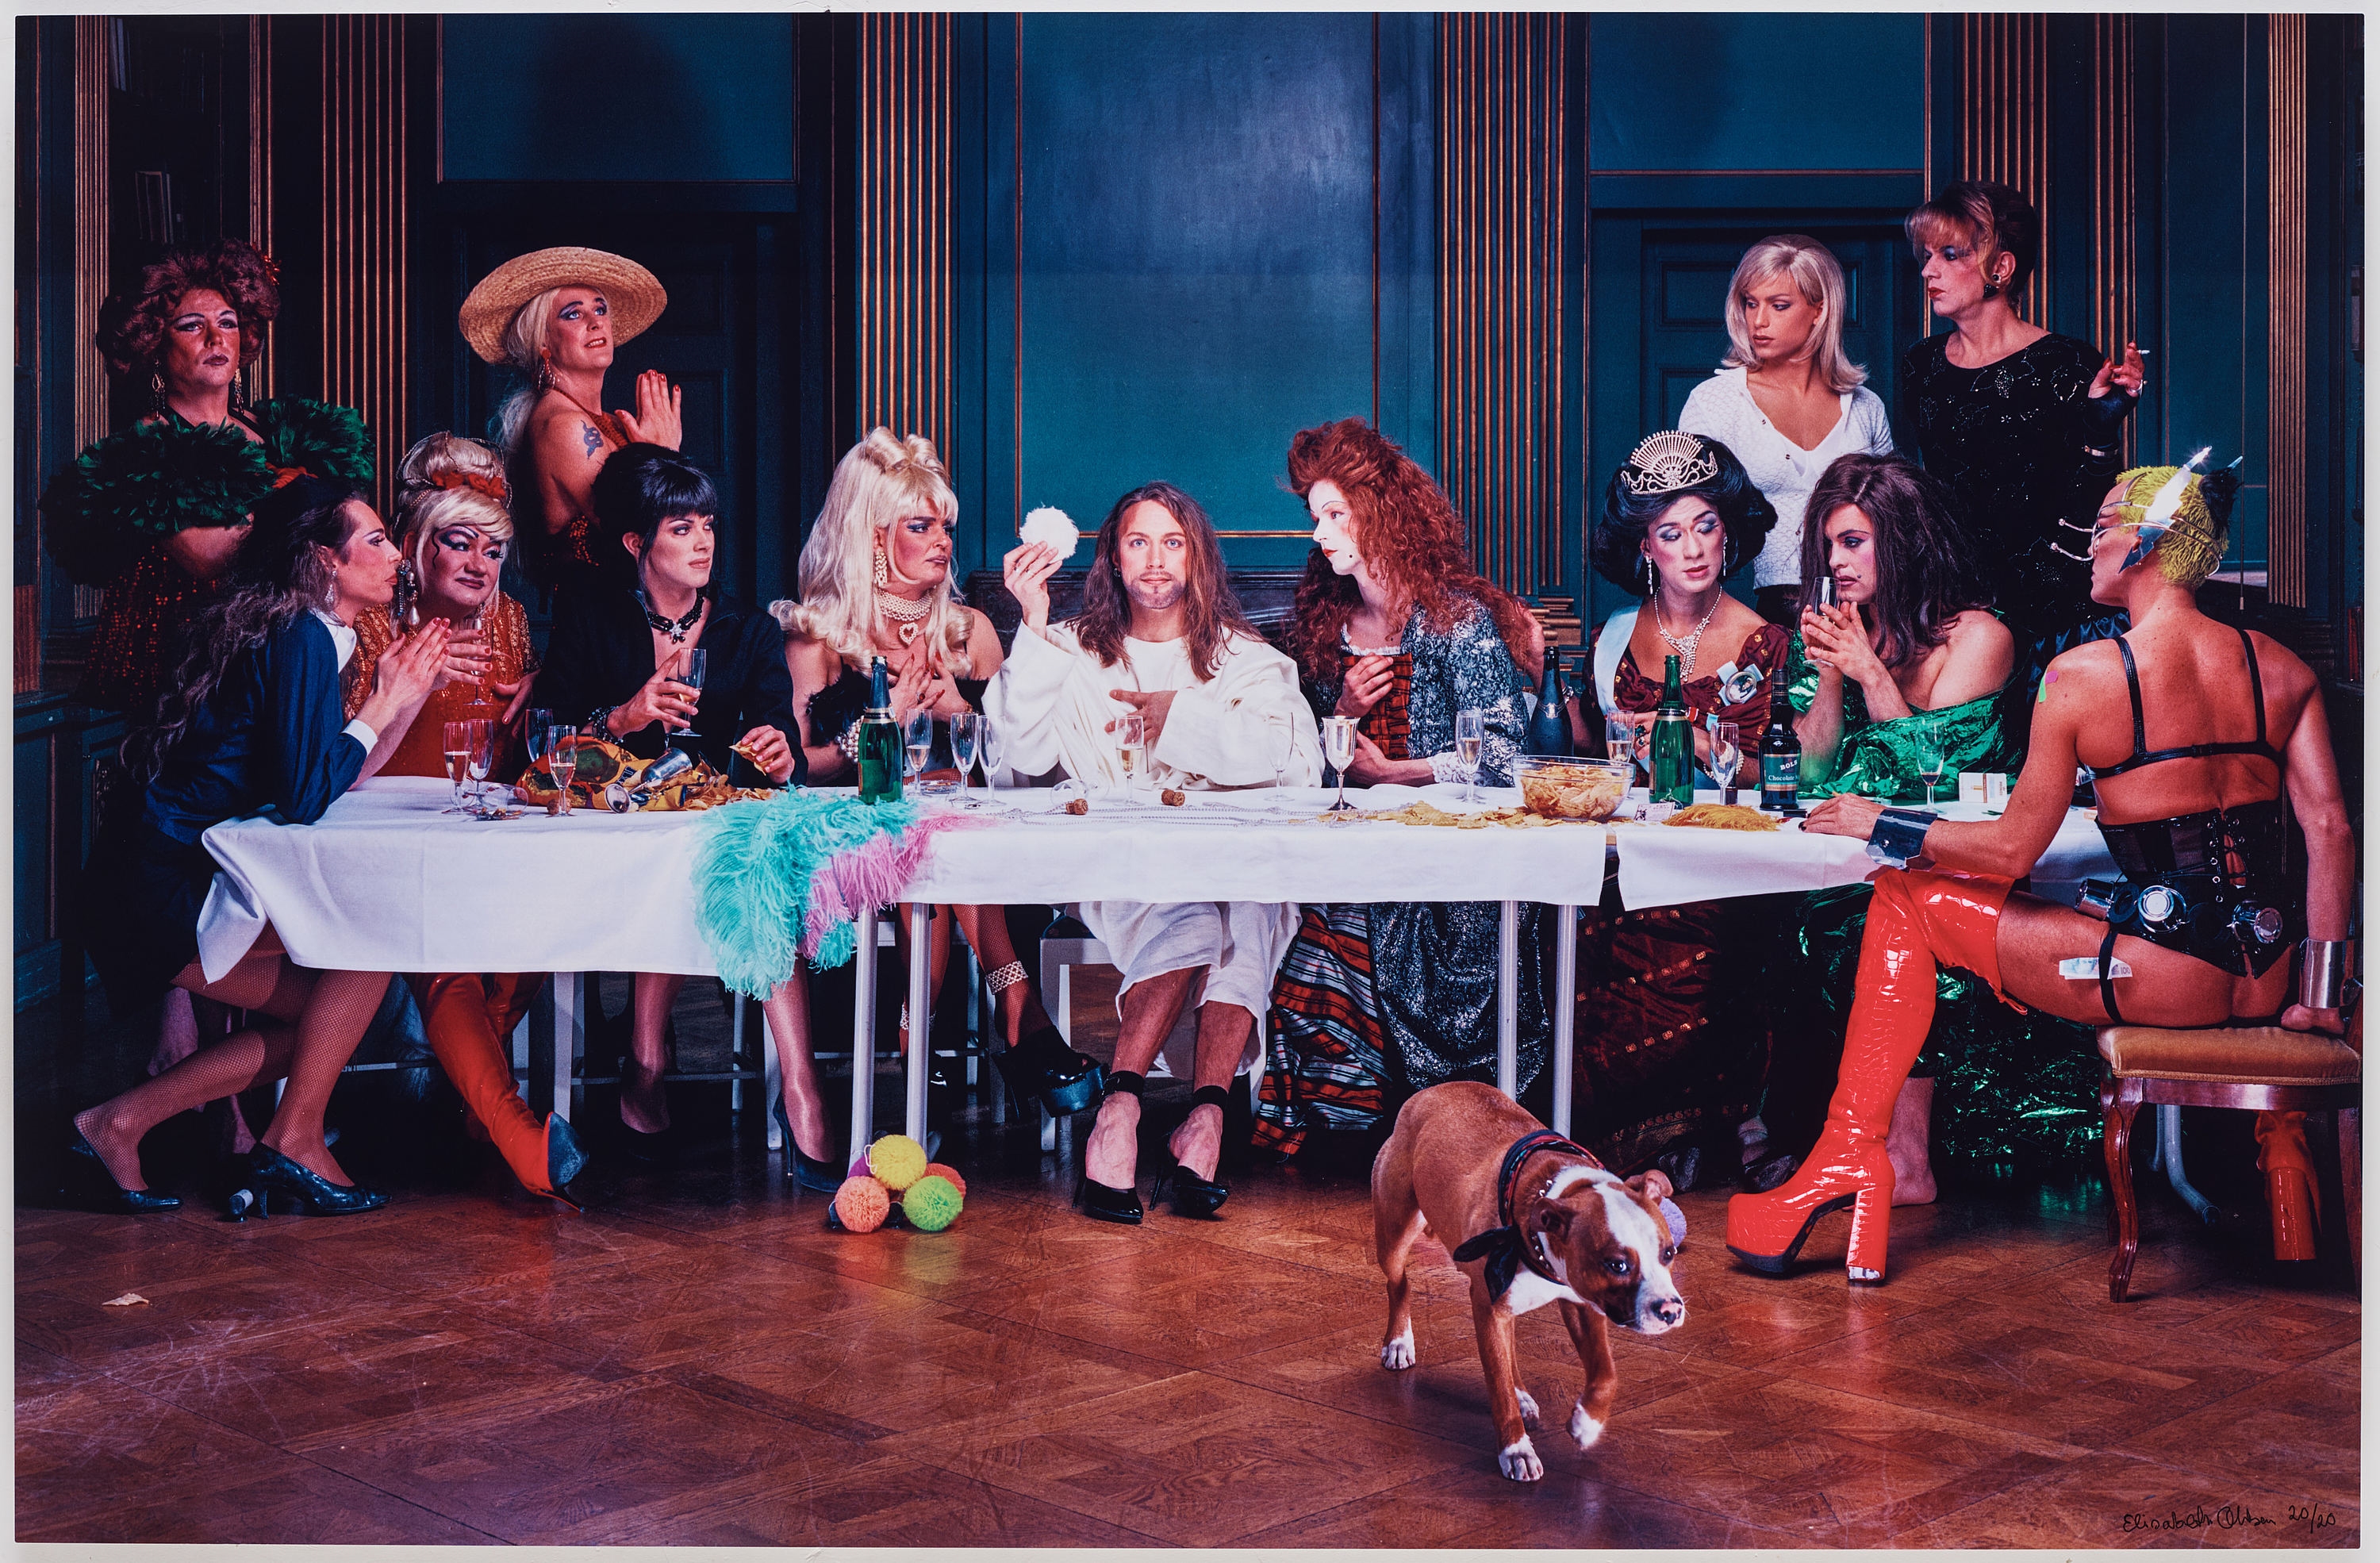 "The Last Supper" from the series "Ecce Homo", 2018 - Elisabeth Ohlson Wallin